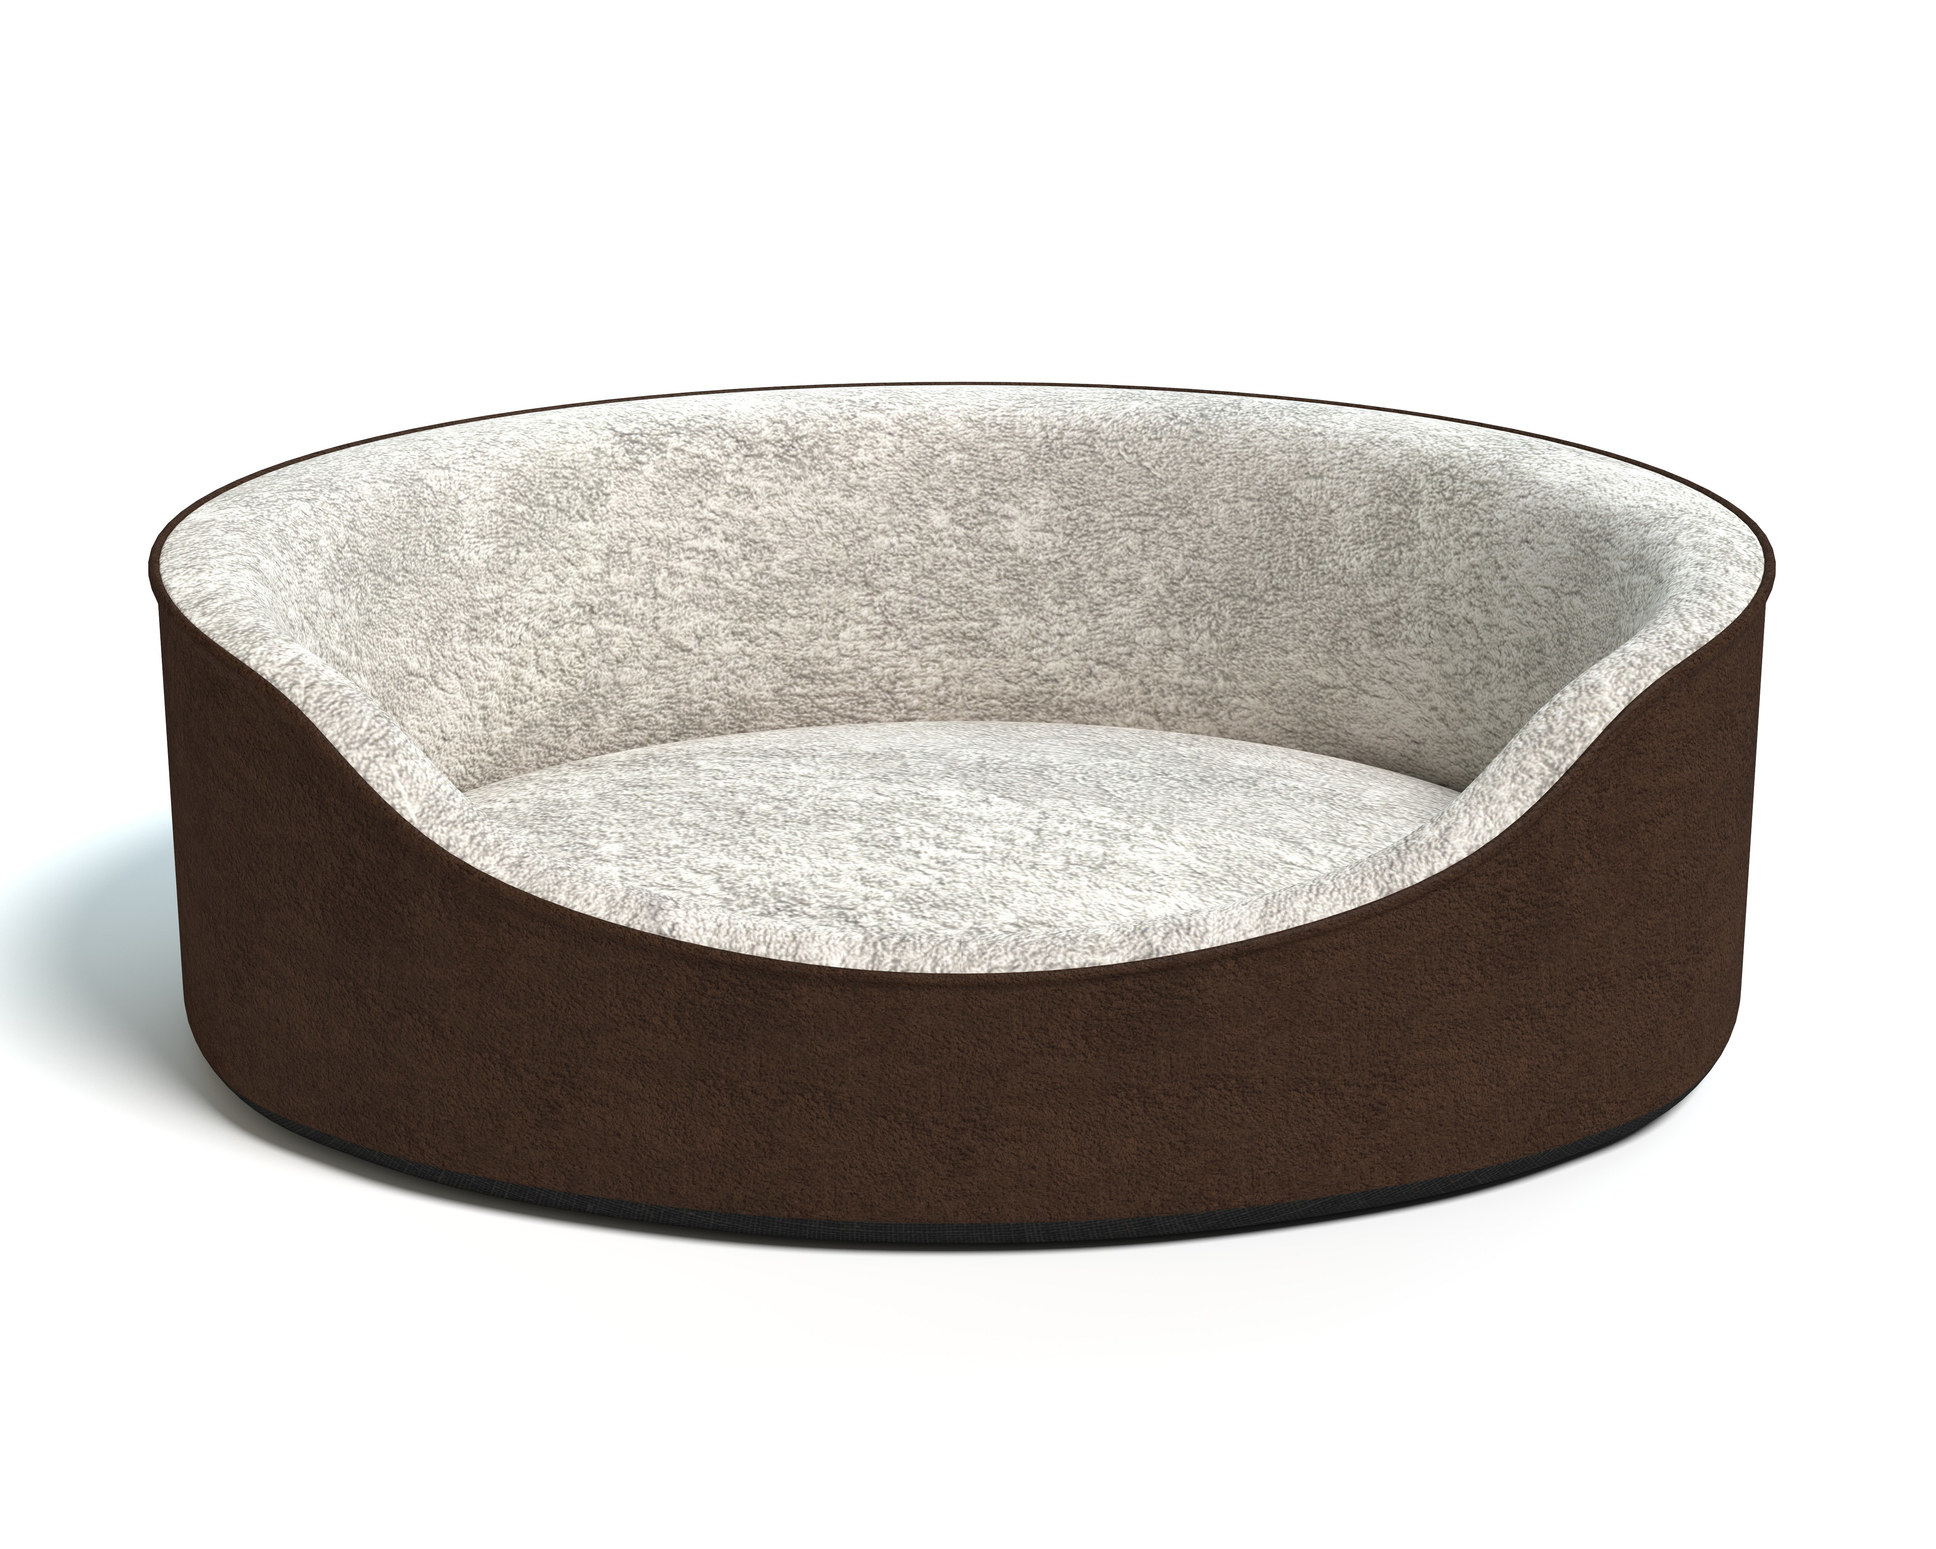 An empty dog bed